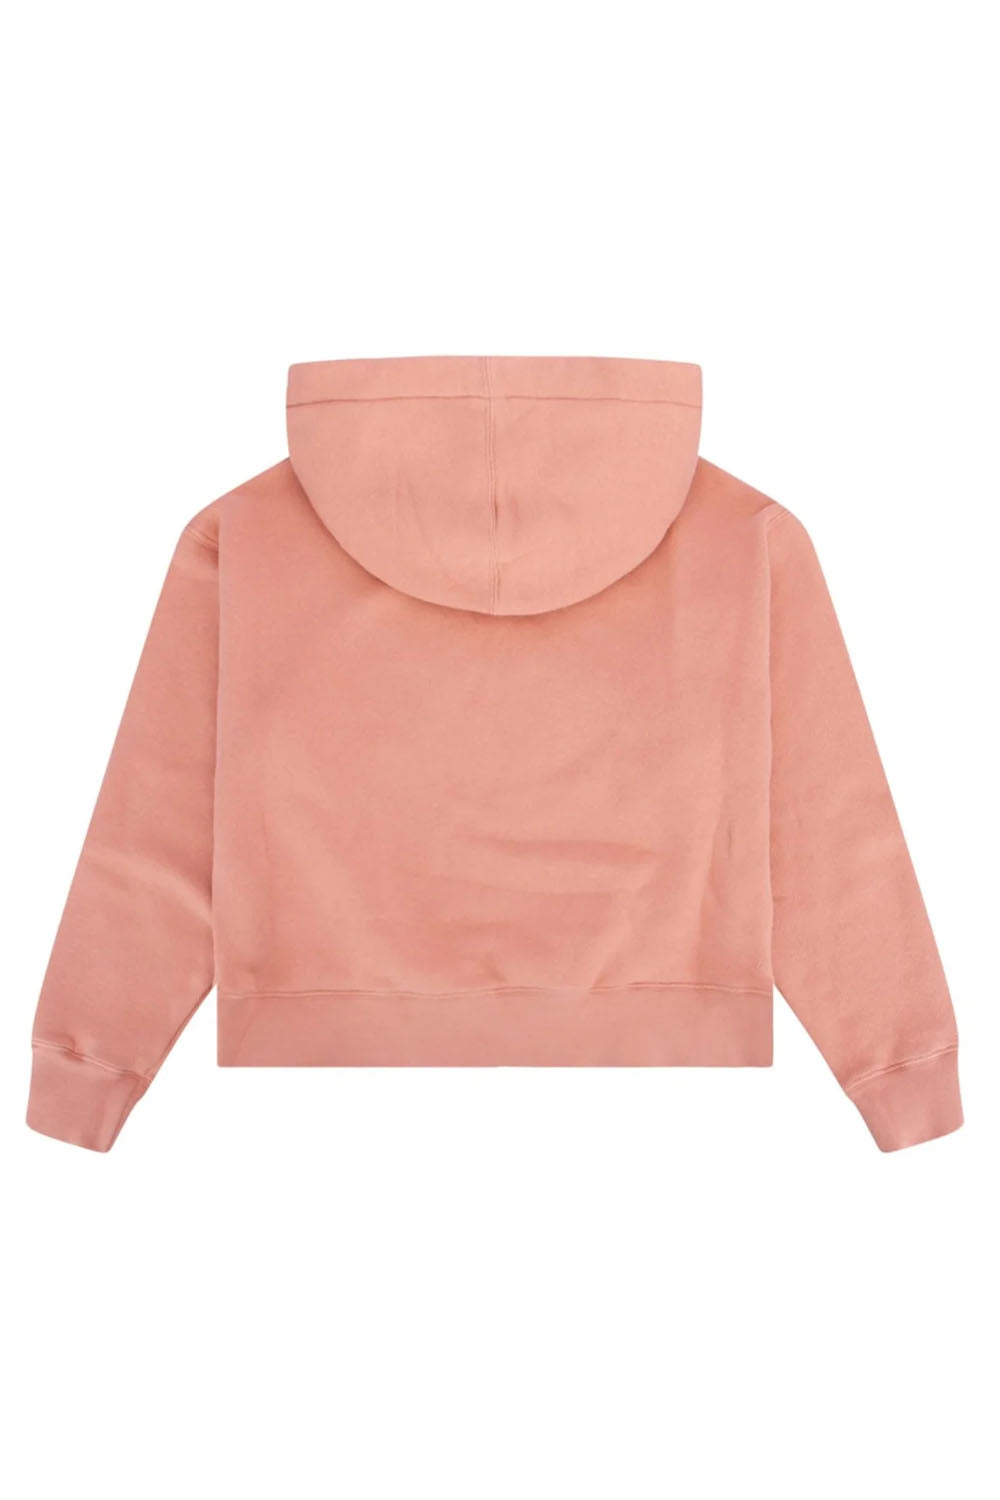 ​Palm Angels Bear Hoodie for Girls - Maison7